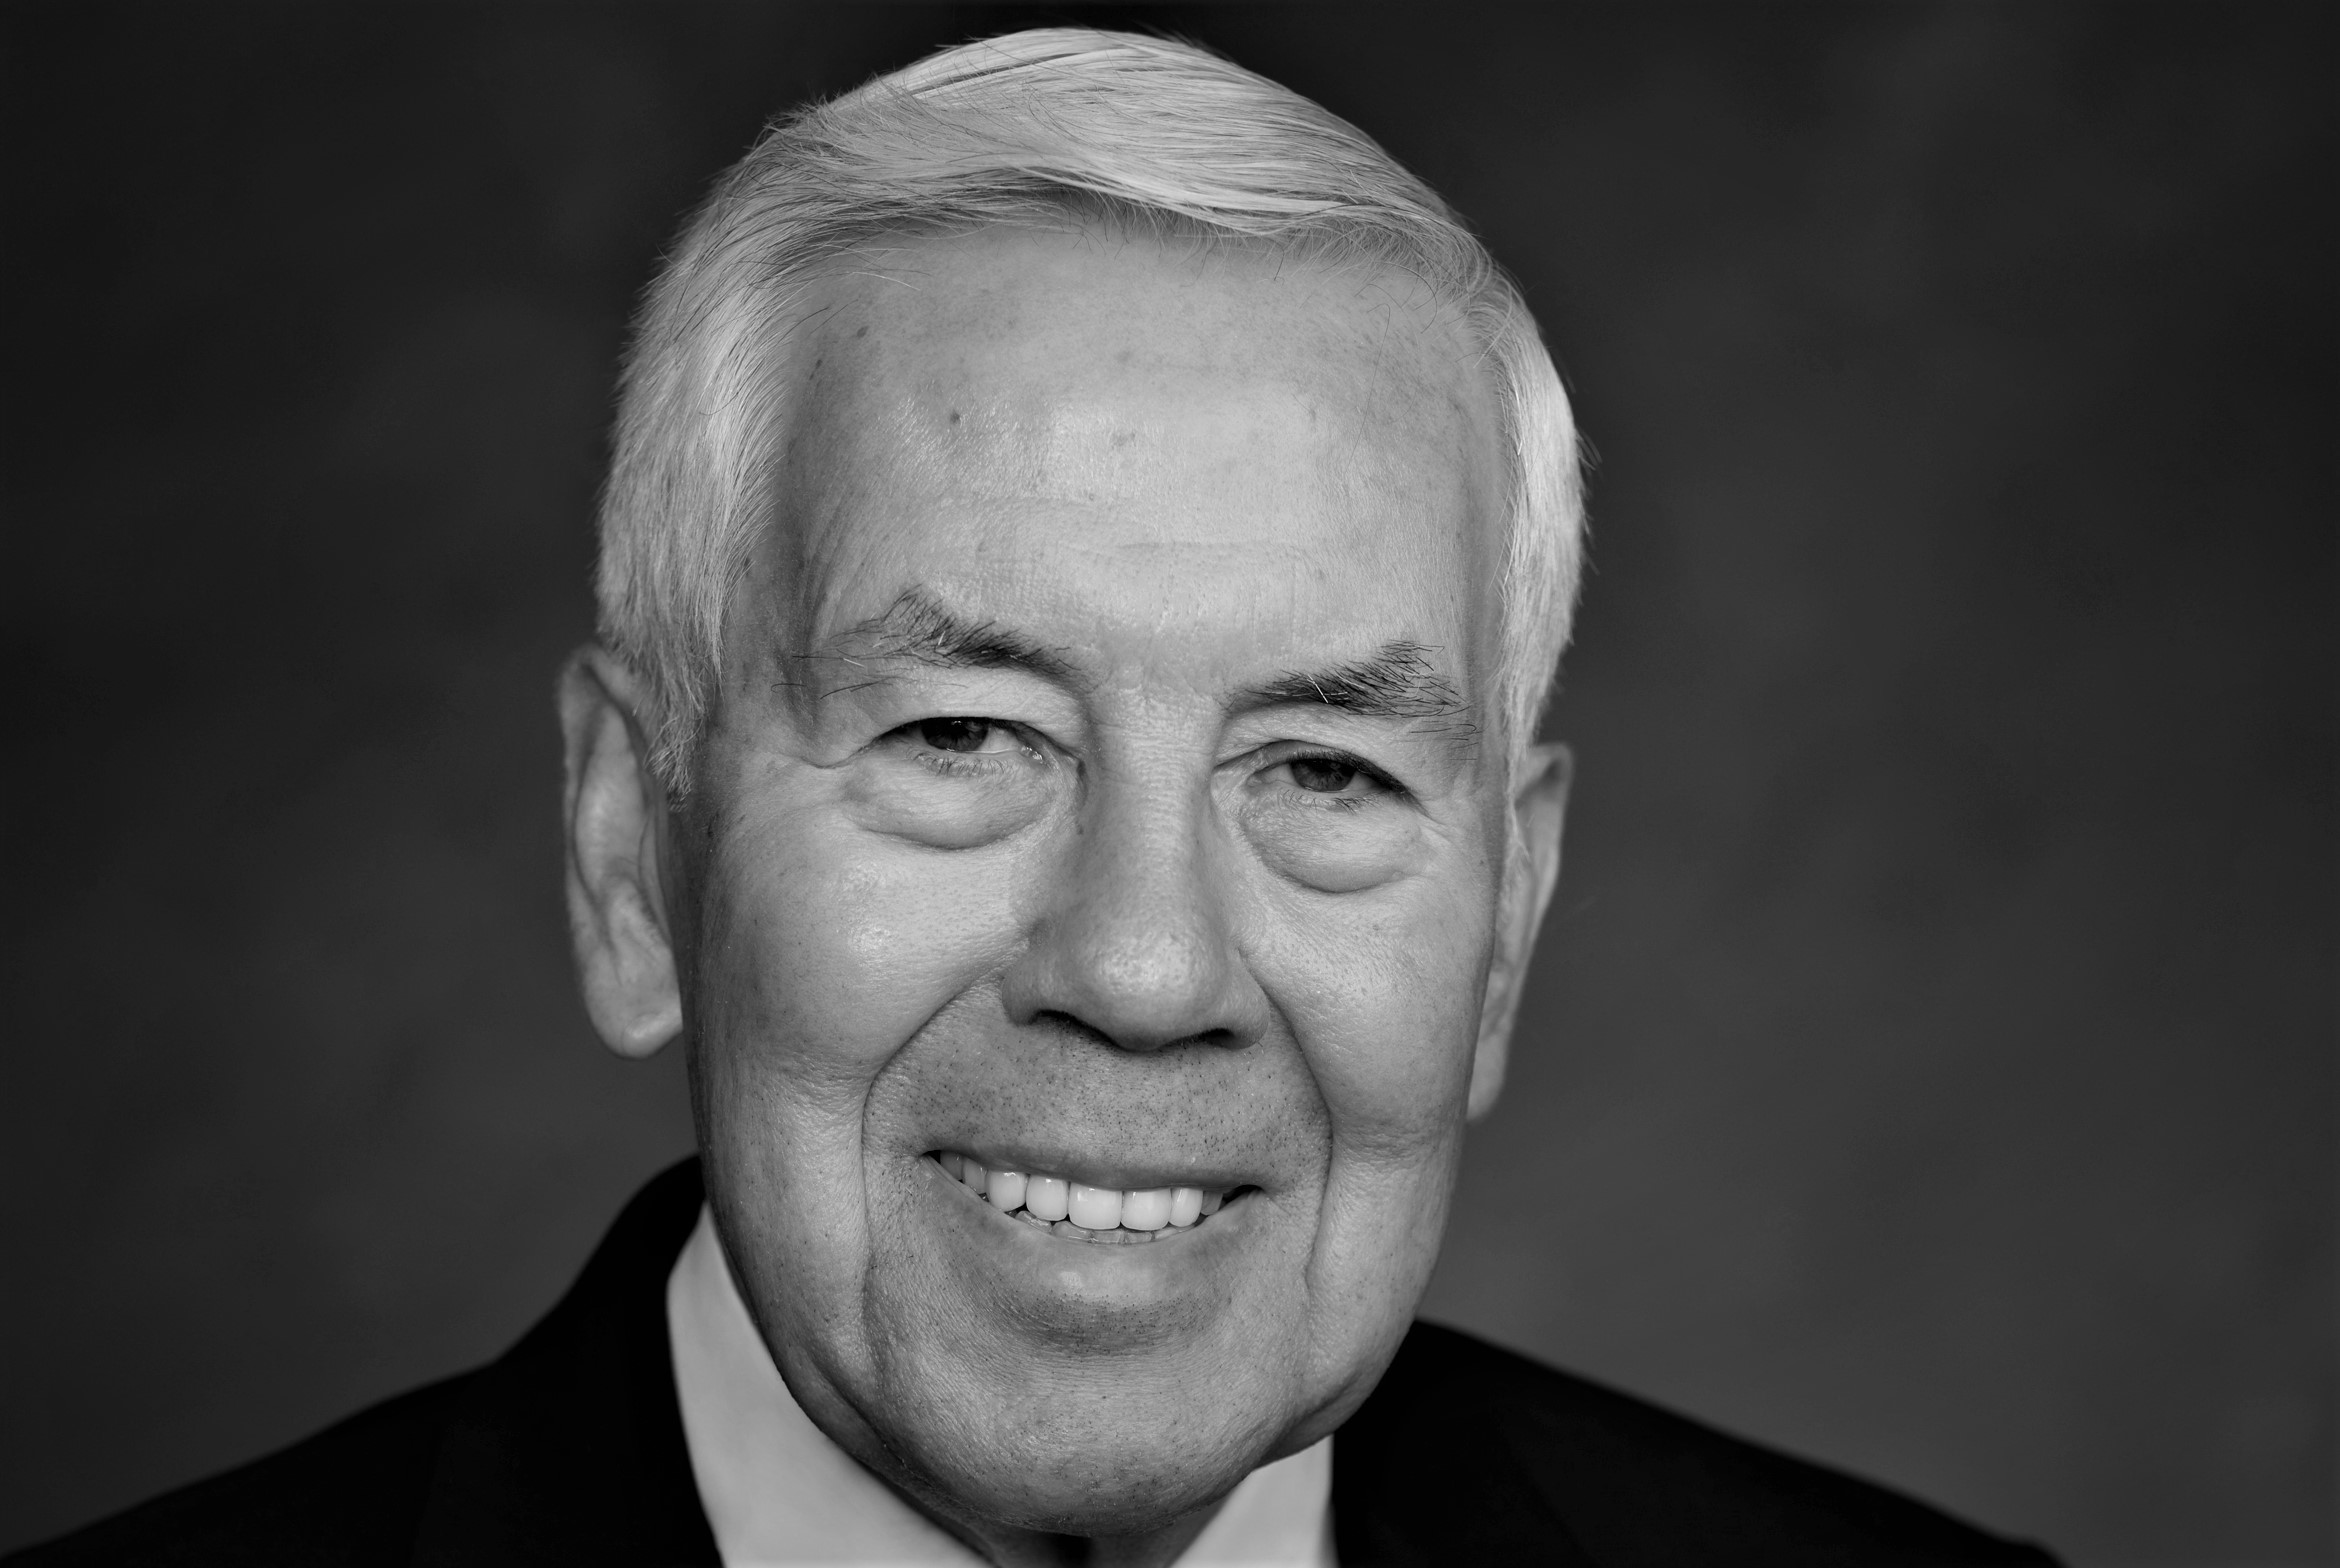 Dick Lugar official photo 2010 лаборатория Лугара лаборатория Лугара